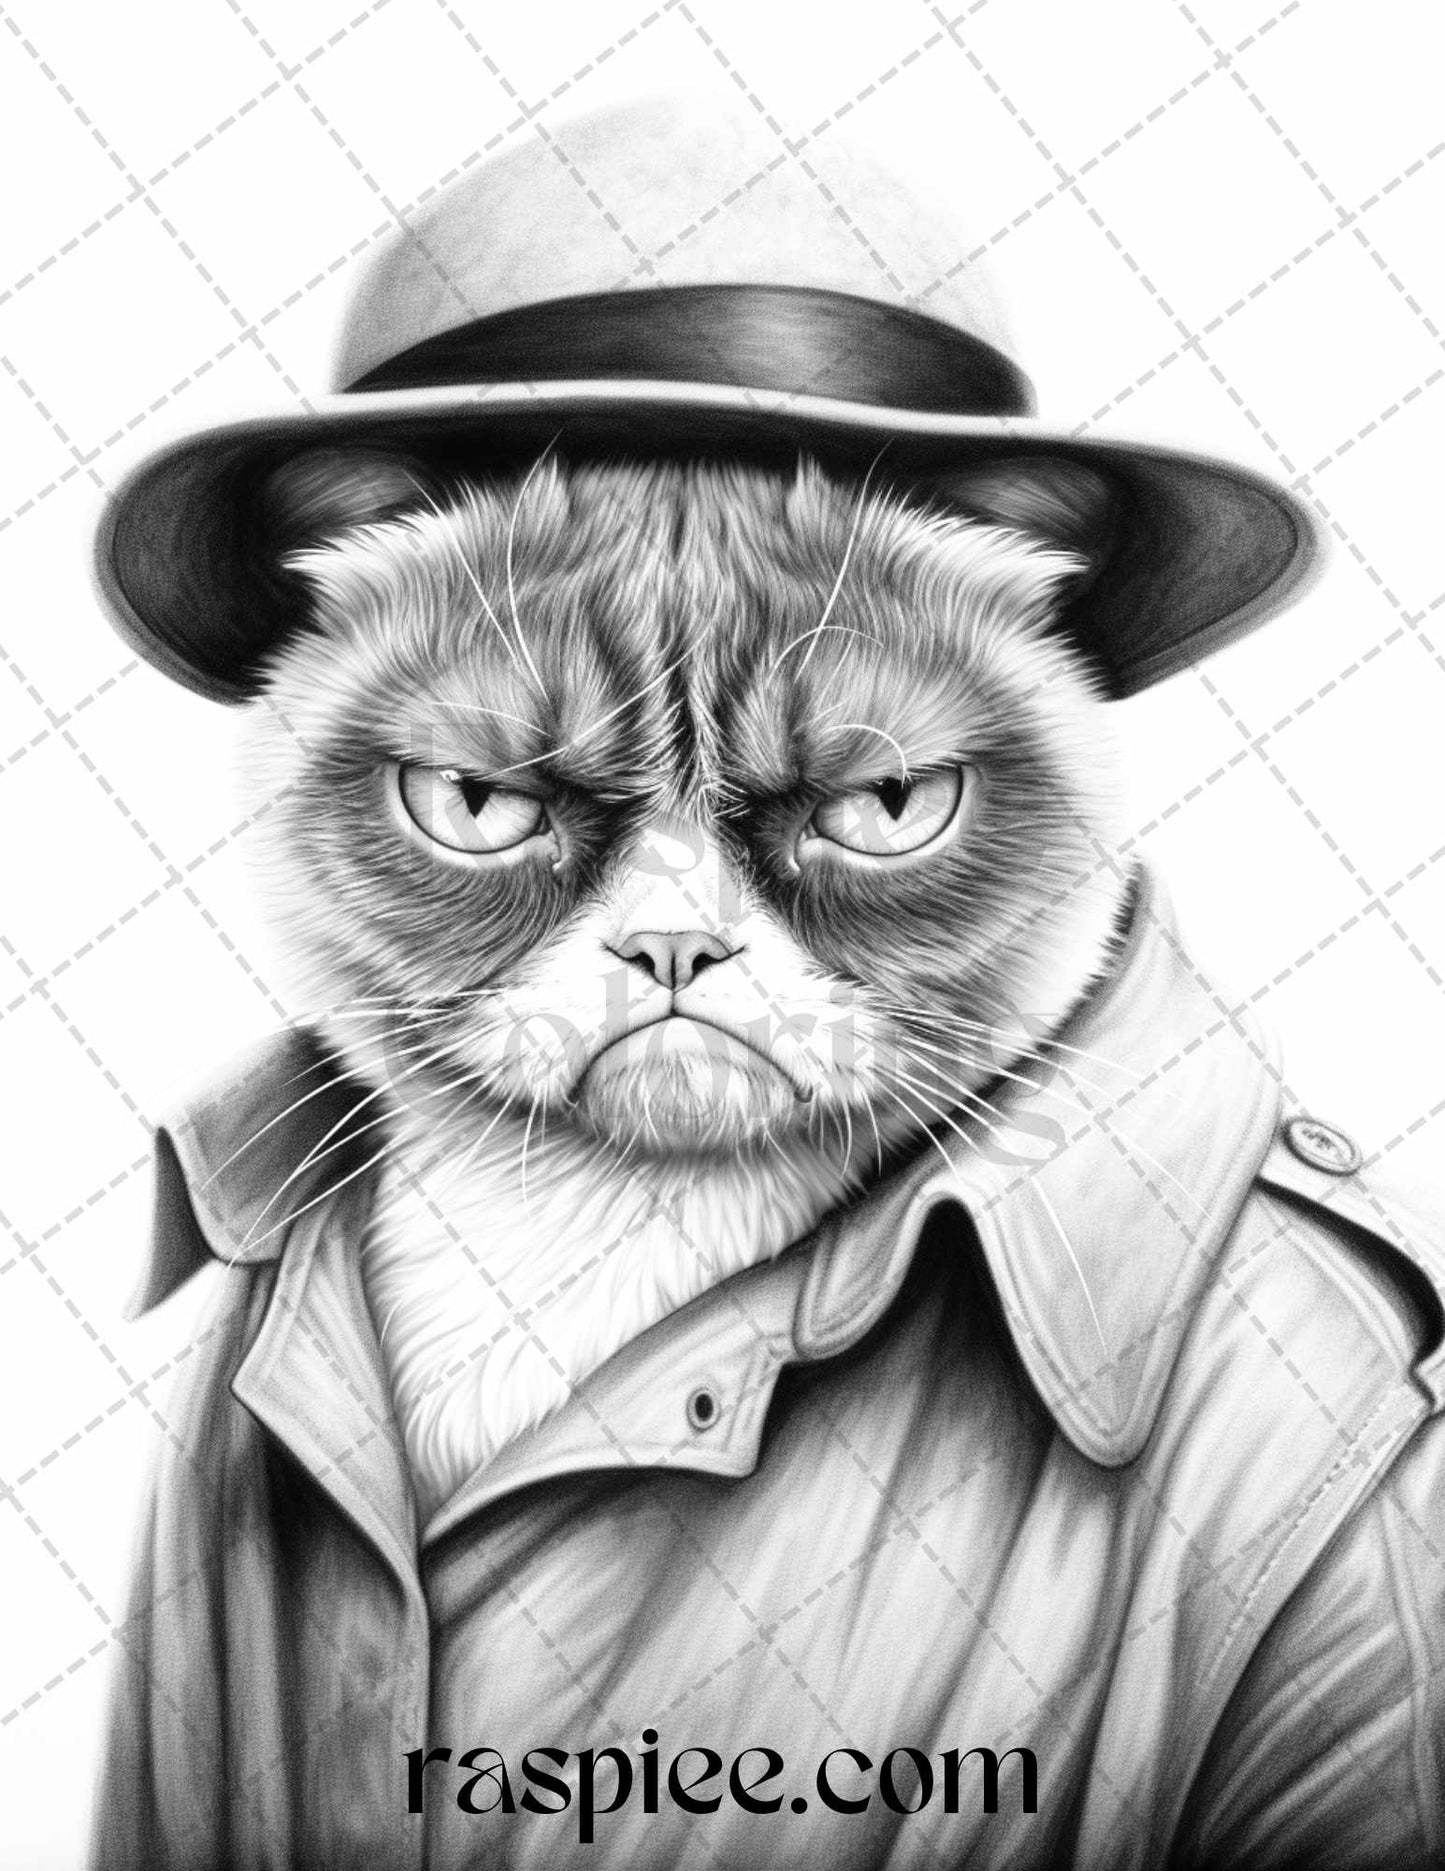 50 Grumpy Cat Grayscale Coloring Pages Printable for Adults, PDF File Instant Download